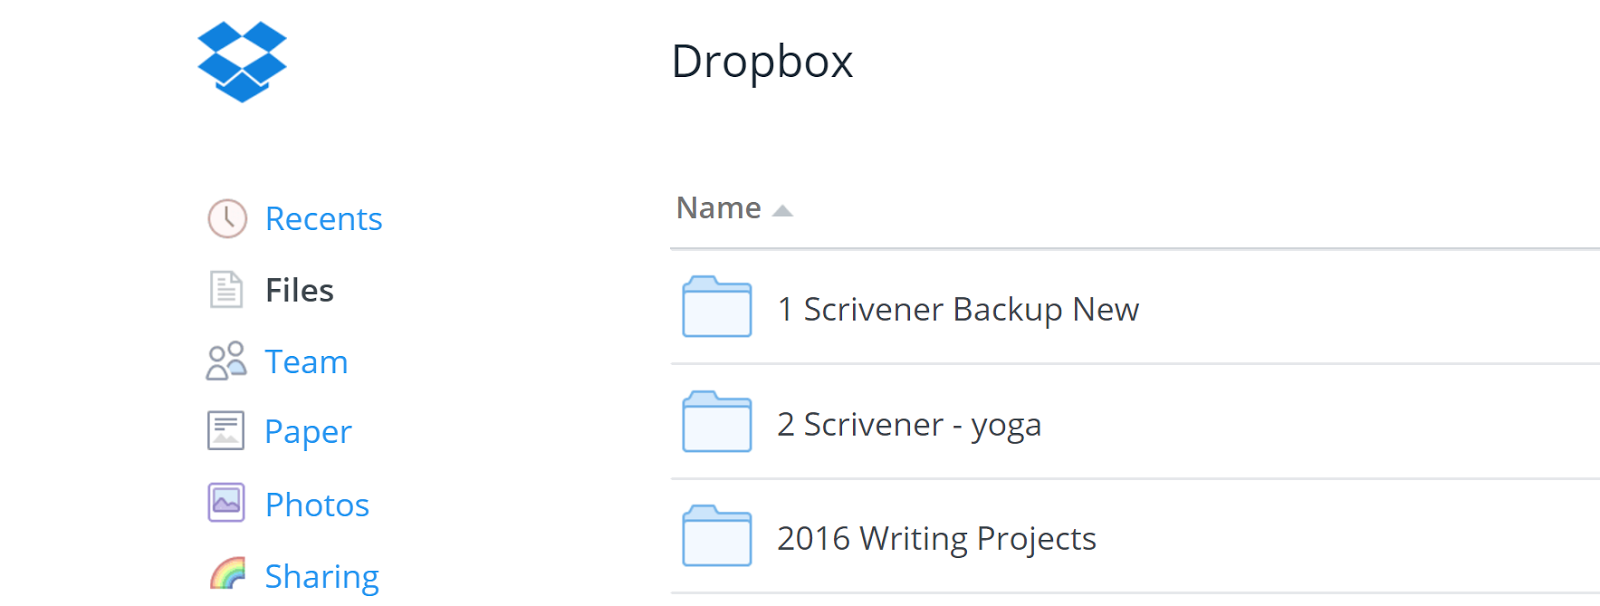 DropBox for file backup and sharing - productivity tools for working from home